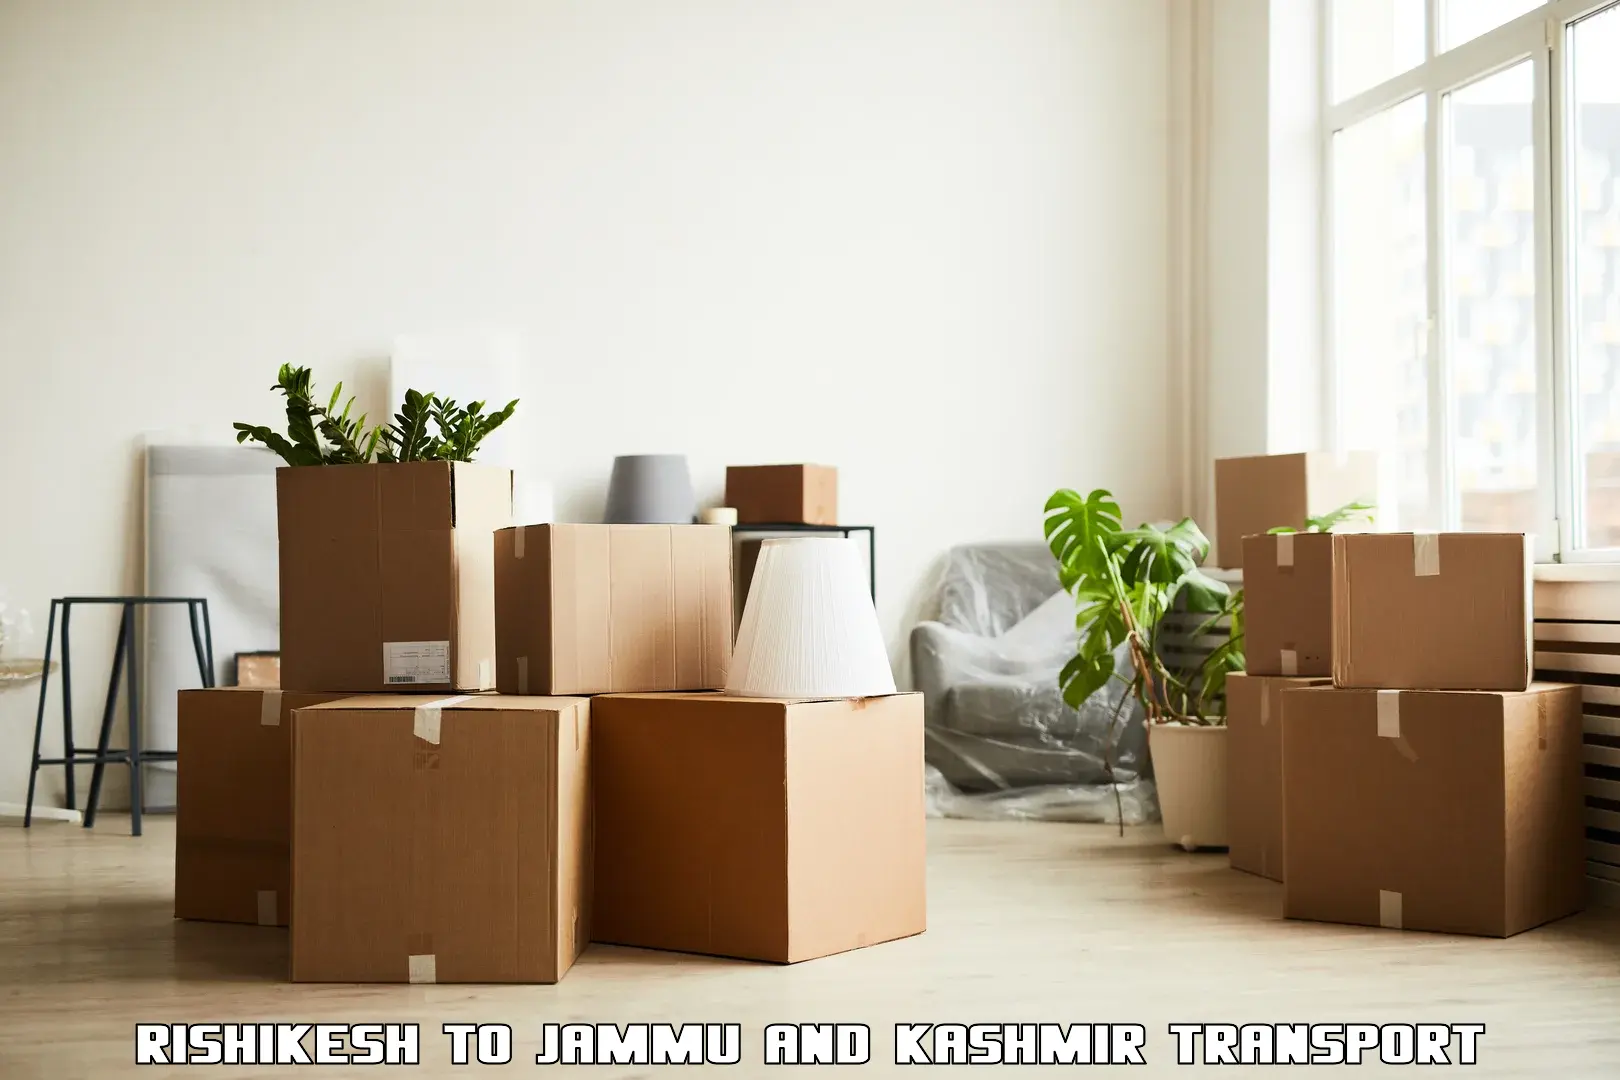 Container transport service Rishikesh to Jammu and Kashmir